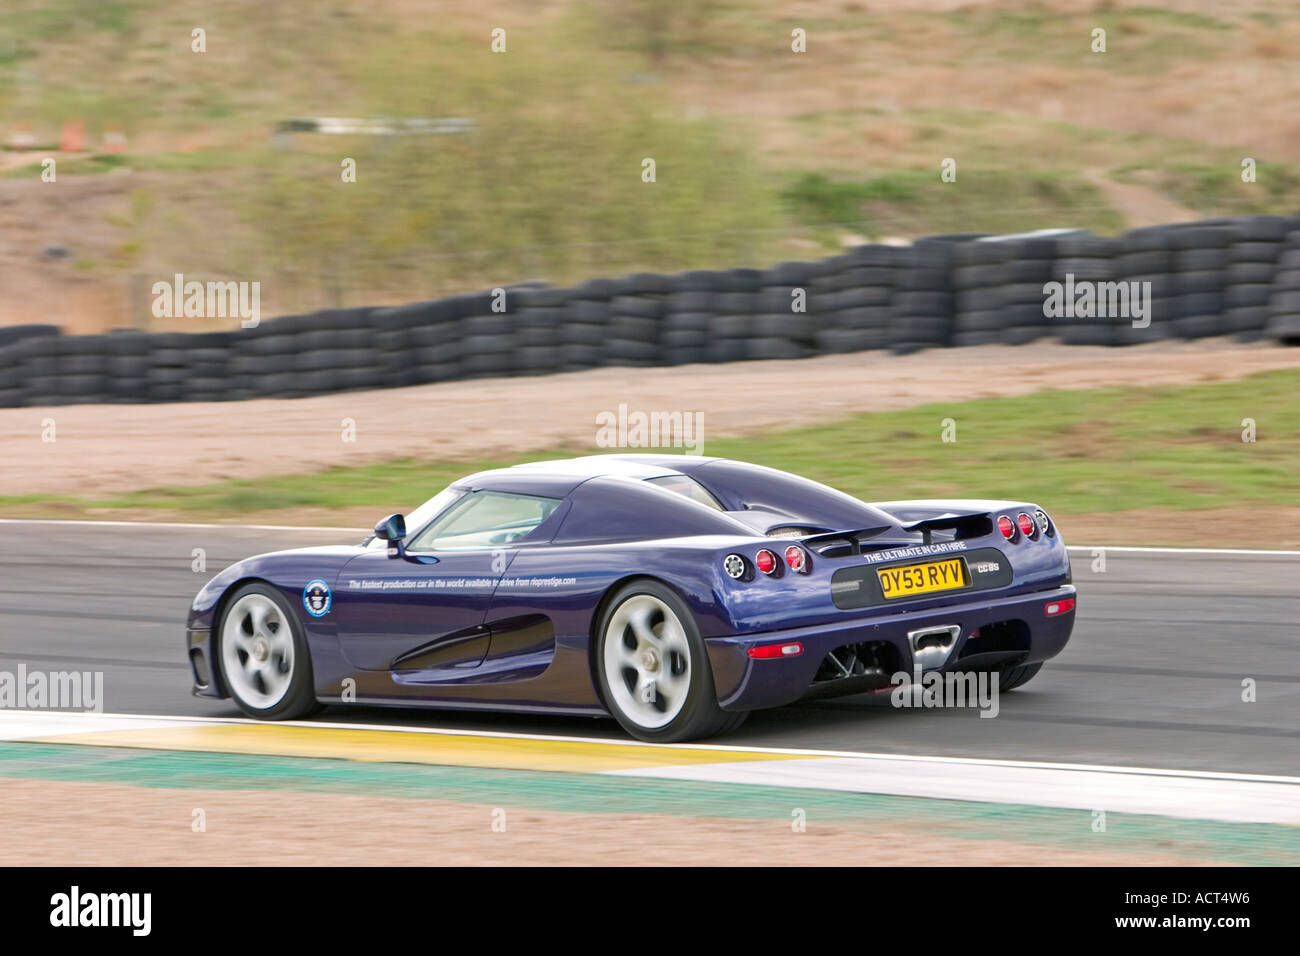 koenigsegg cc8s fastest production car in the world knockhill racing ACT4W6